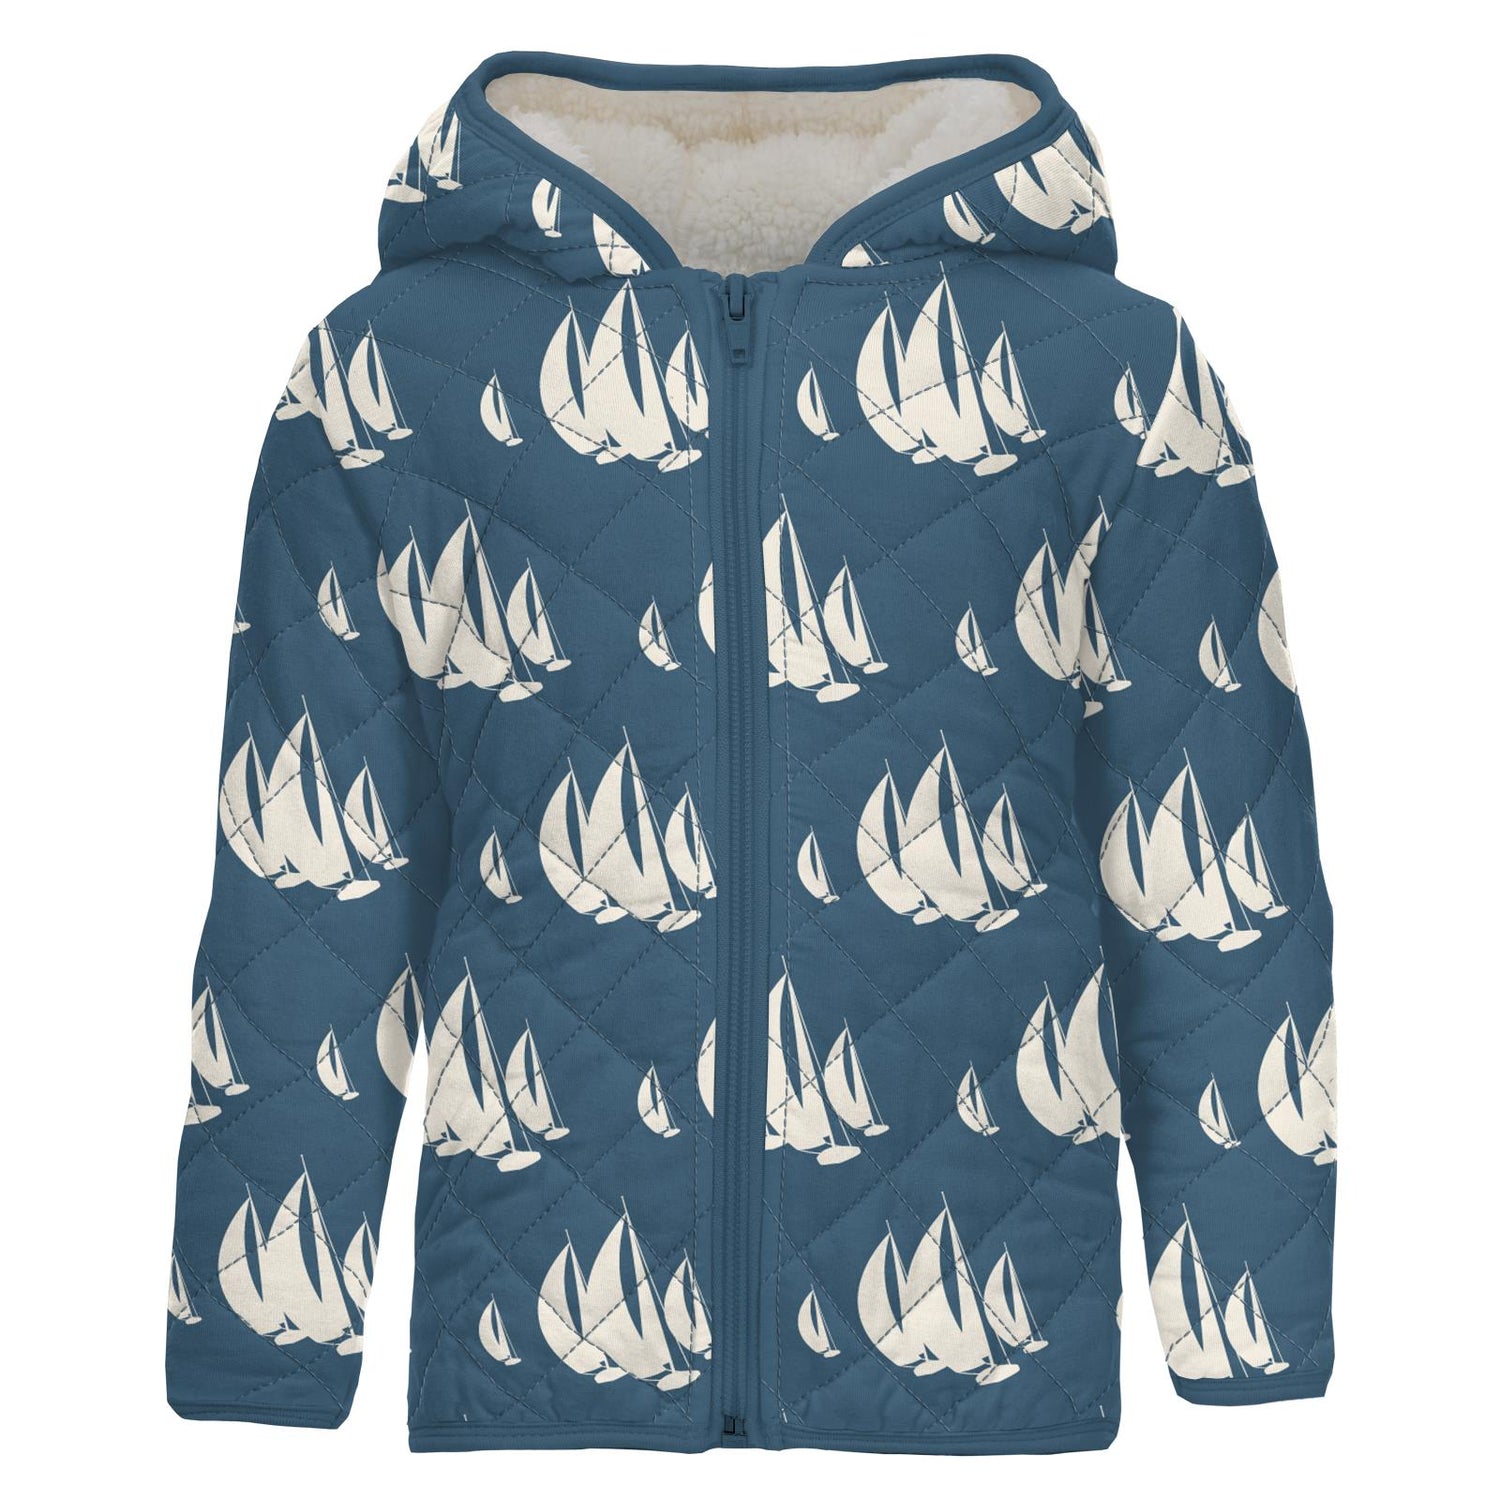 Print Quilted Jacket with Sherpa-Lined Hood in Deep Sea Sailboat Race/Nautical Stripe